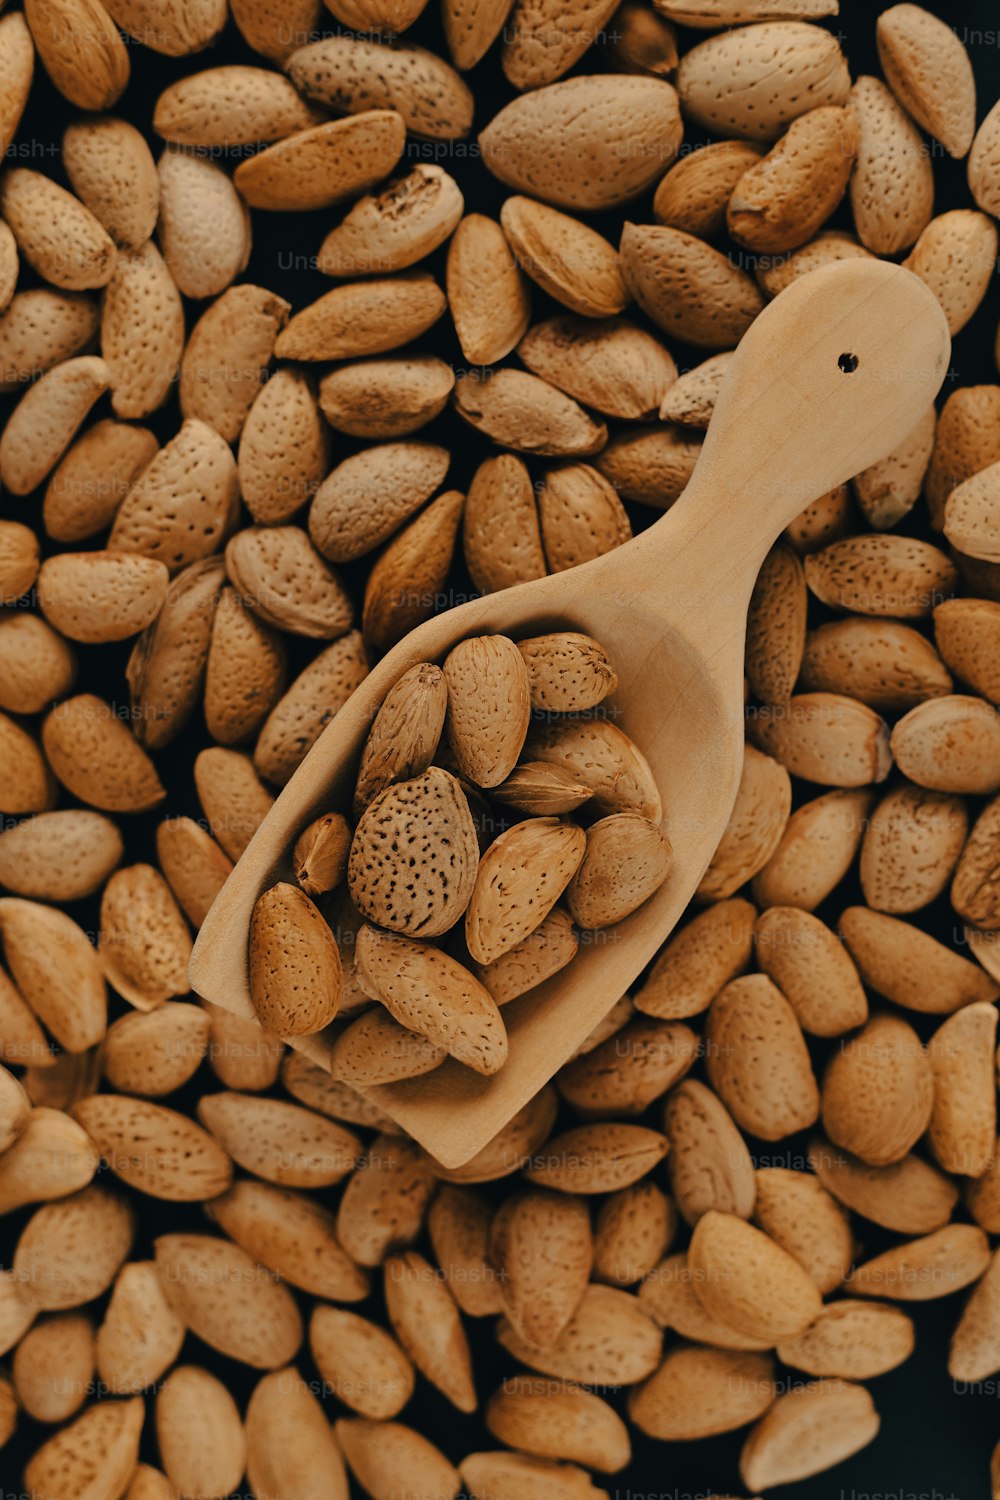 a wooden spoon filled with peanuts on top of a pile of peanuts